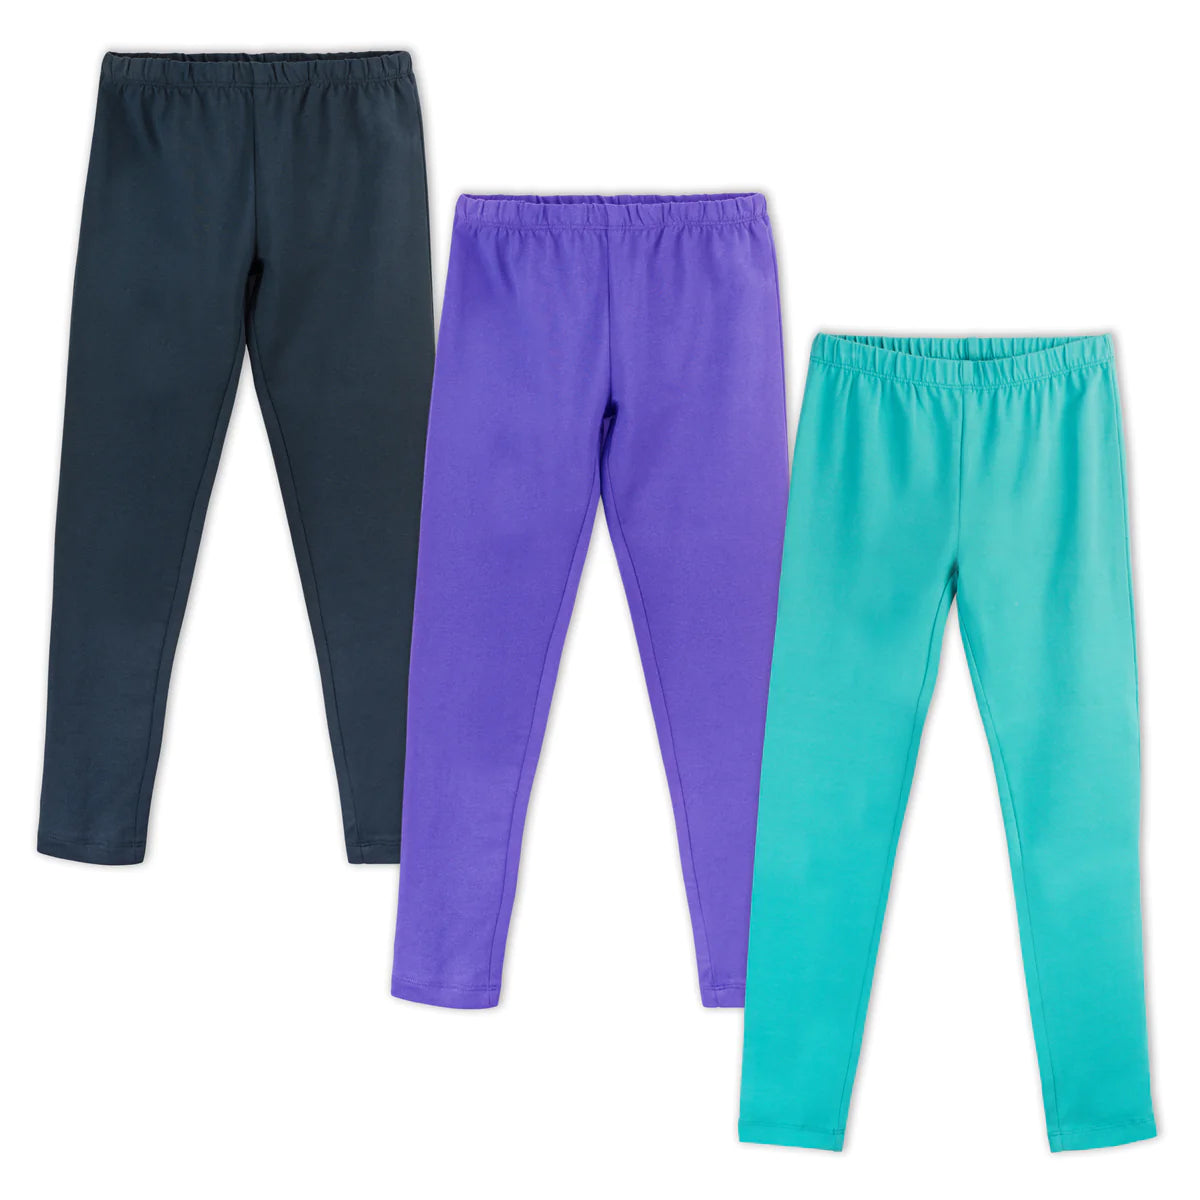 Pre-owned Purple | Black | Turquoise Leggings size: 2-5T